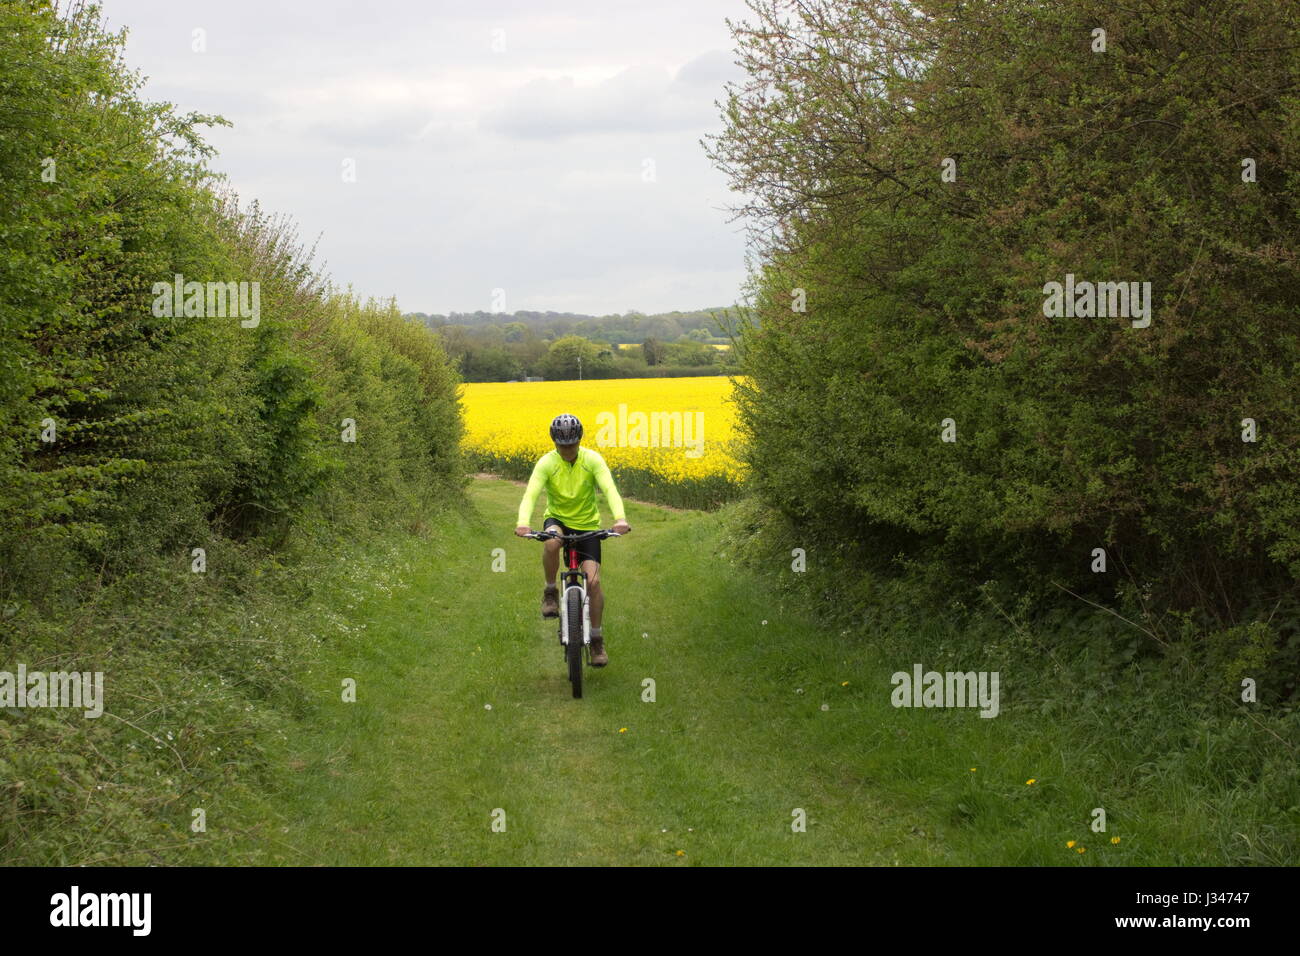 Mountain biking on Bridleway by Rapeseed field off Wooton St Lawrence Hampshire England Stock Photo